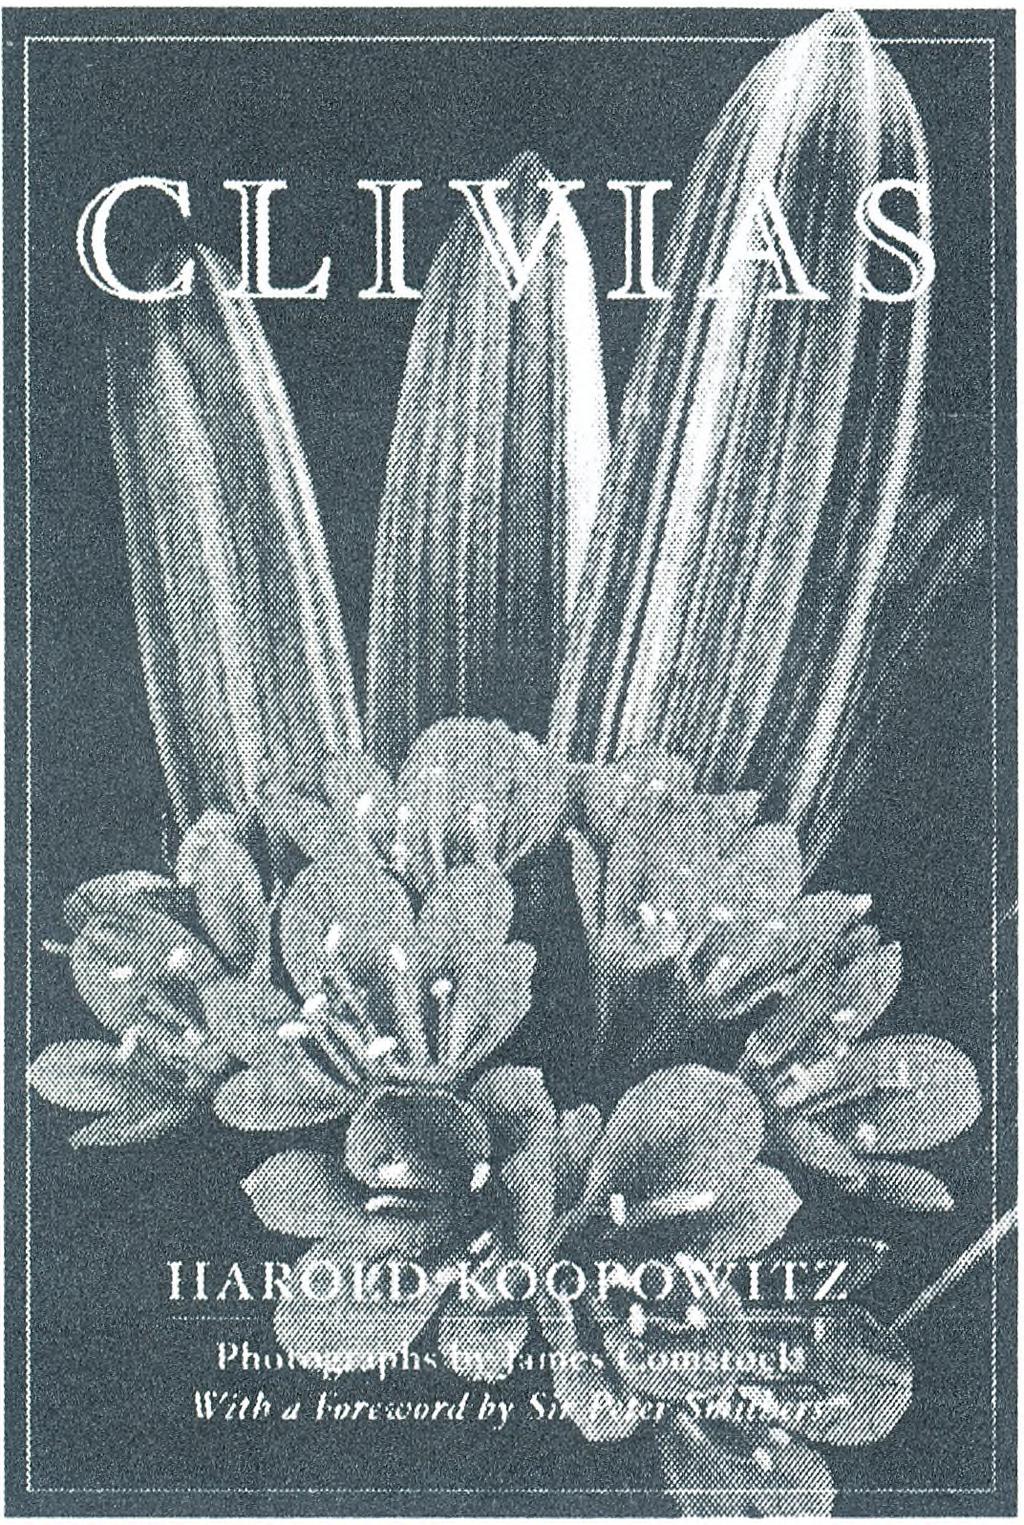 The first book to thoroughly detail the history, charms, and horticultural future of the genus Clivia.